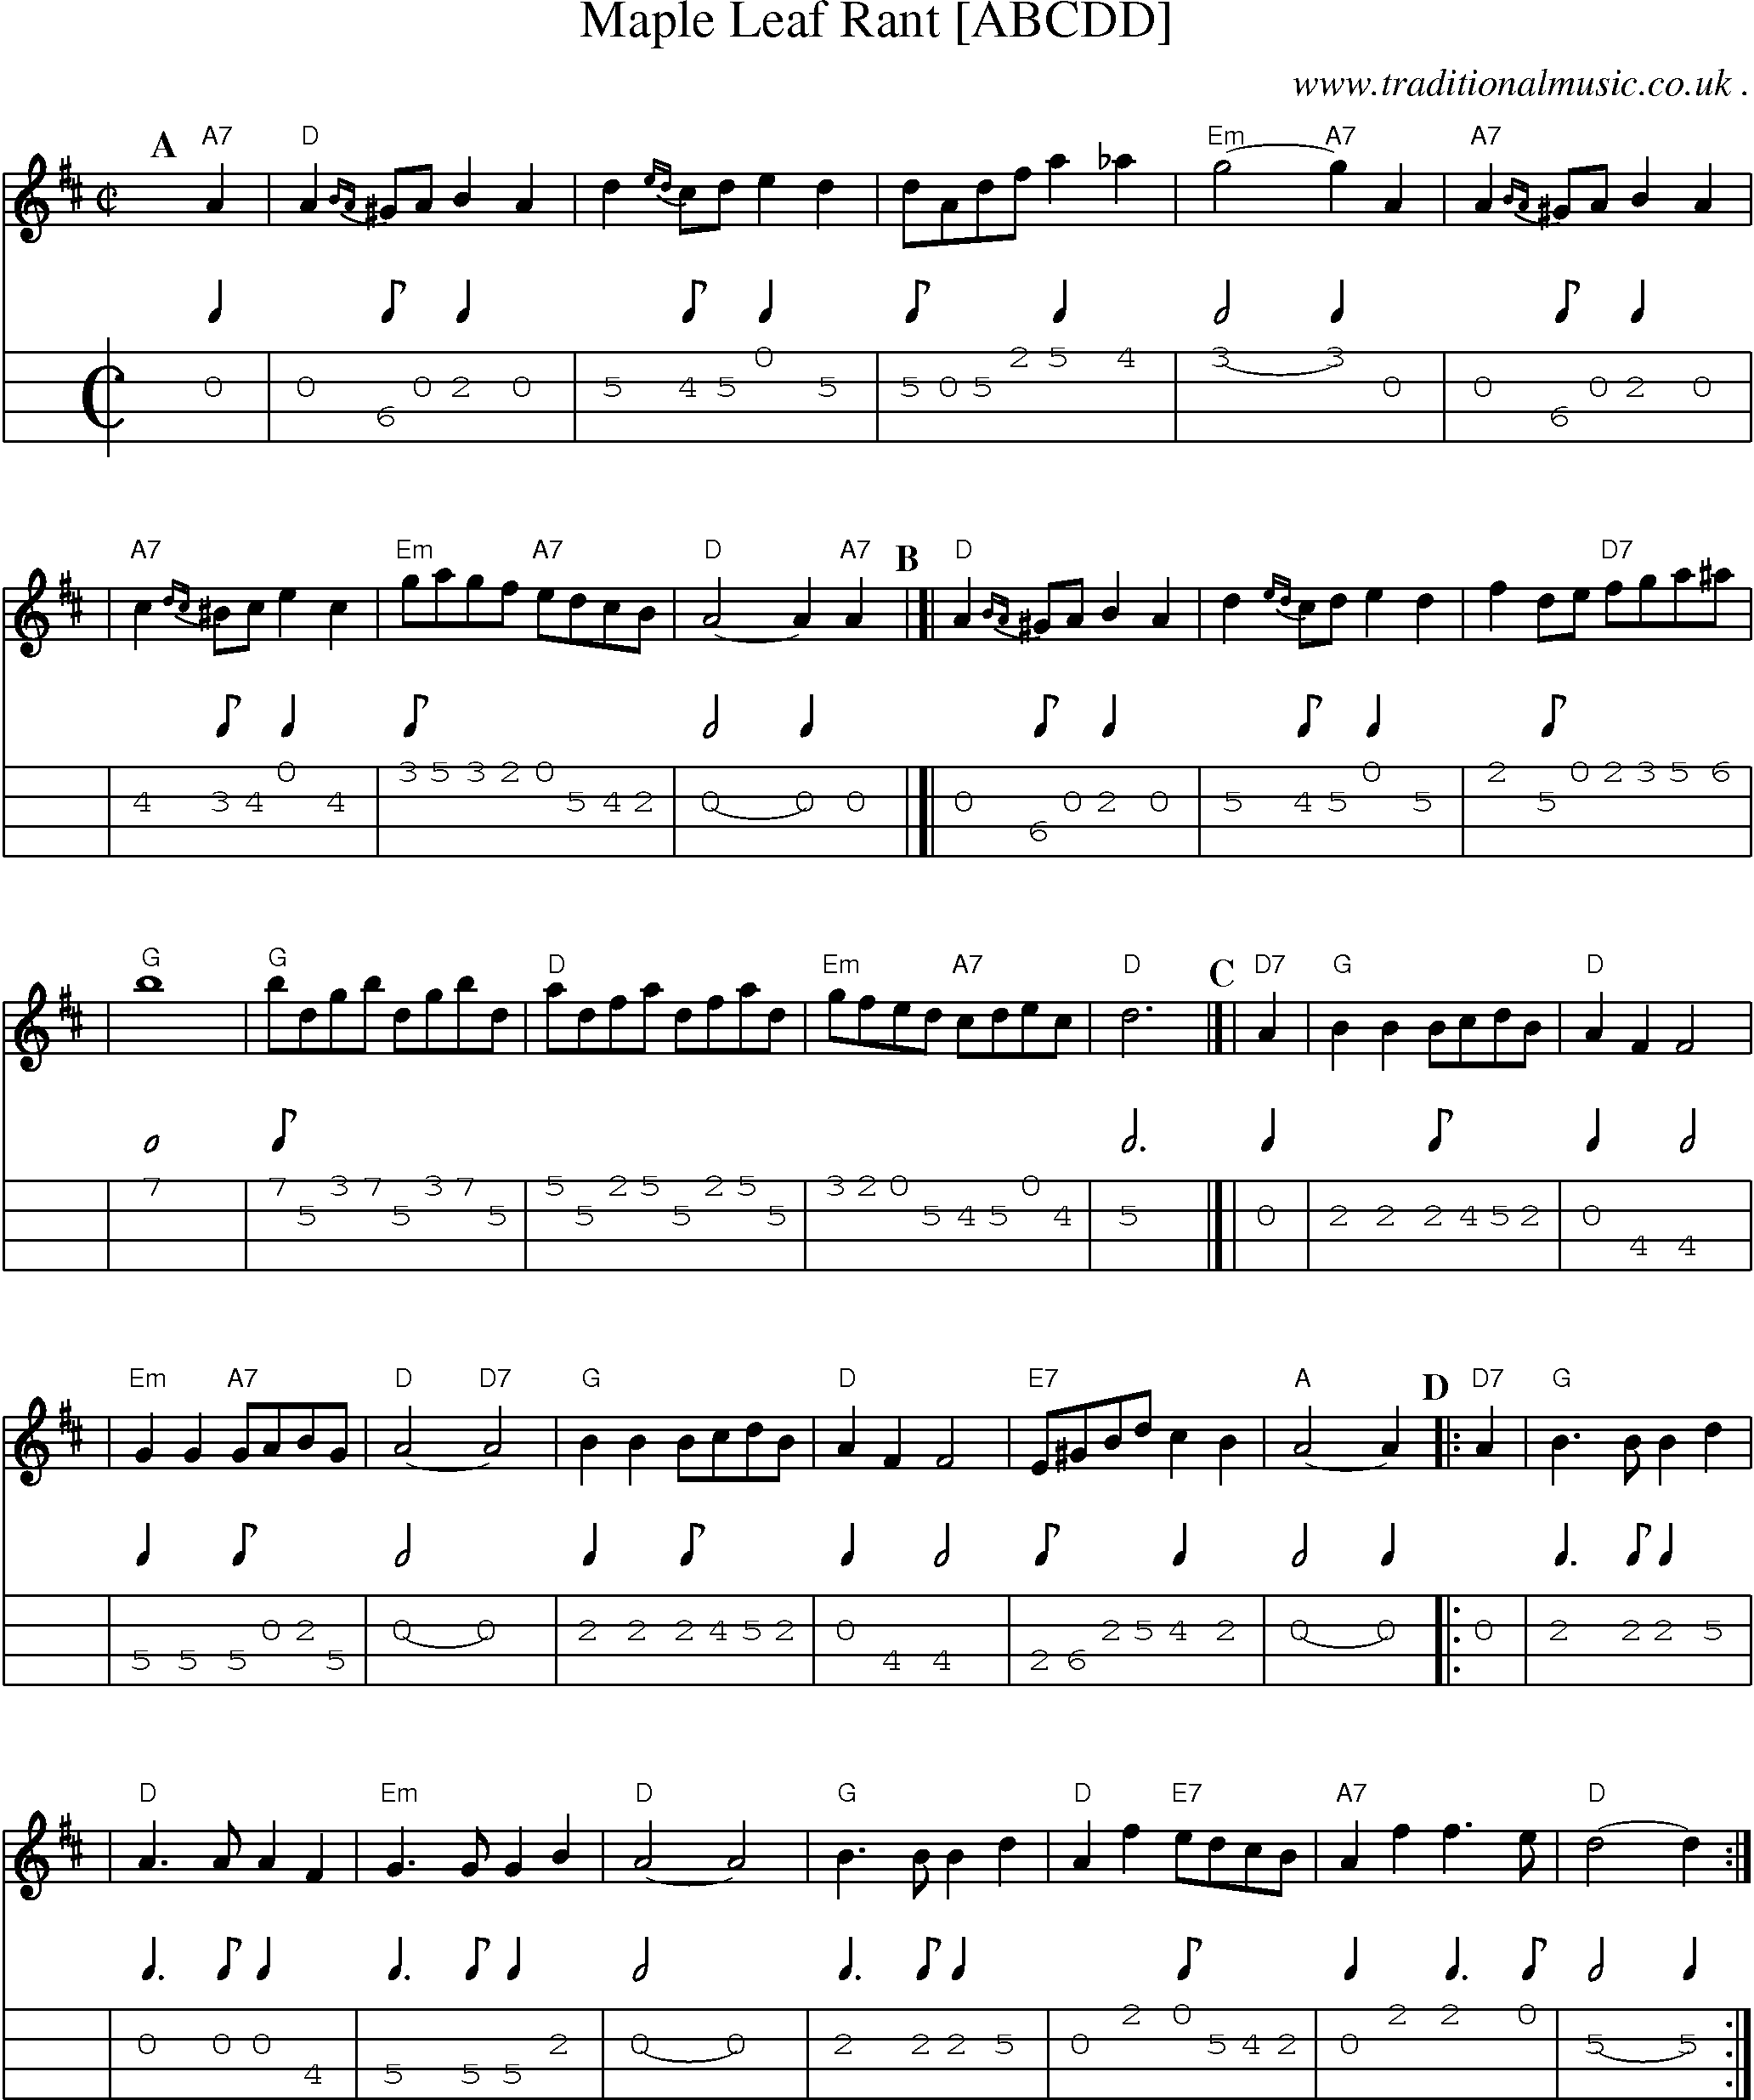 Sheet-music  score, Chords and Mandolin Tabs for Maple Leaf Rant [abcdd]